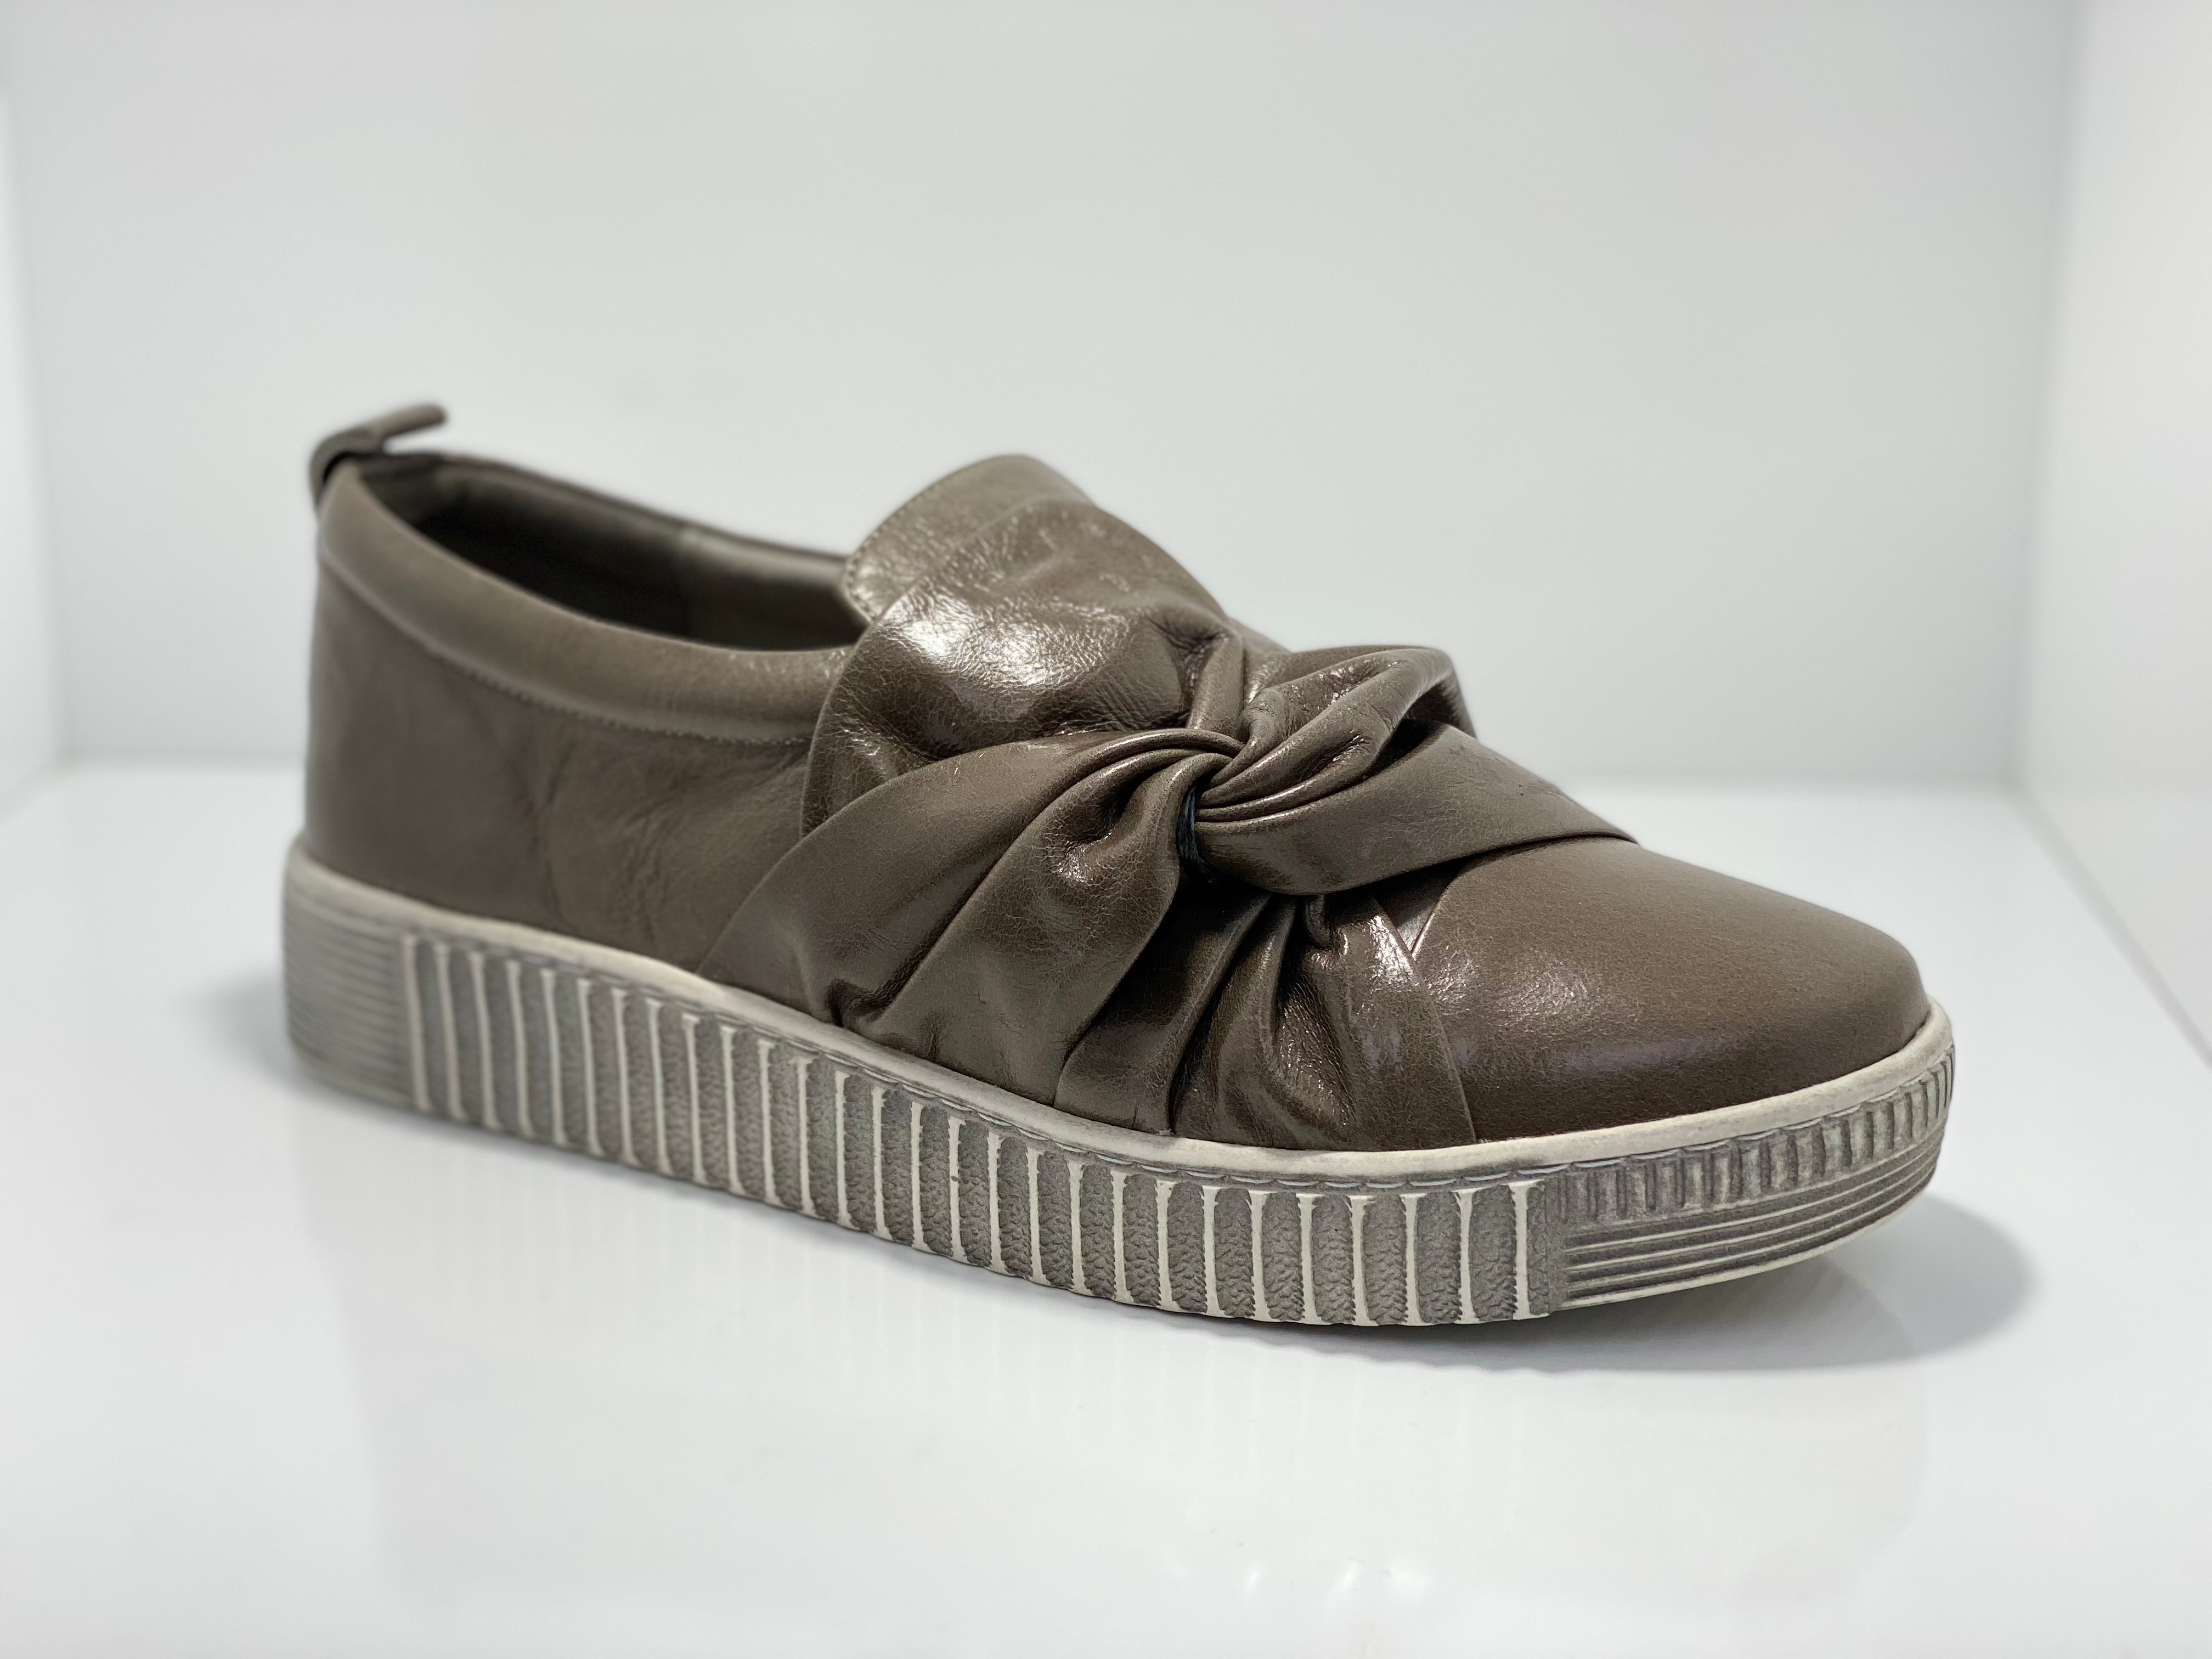 Bowie Knot Slip On Leather Shoe Hinako